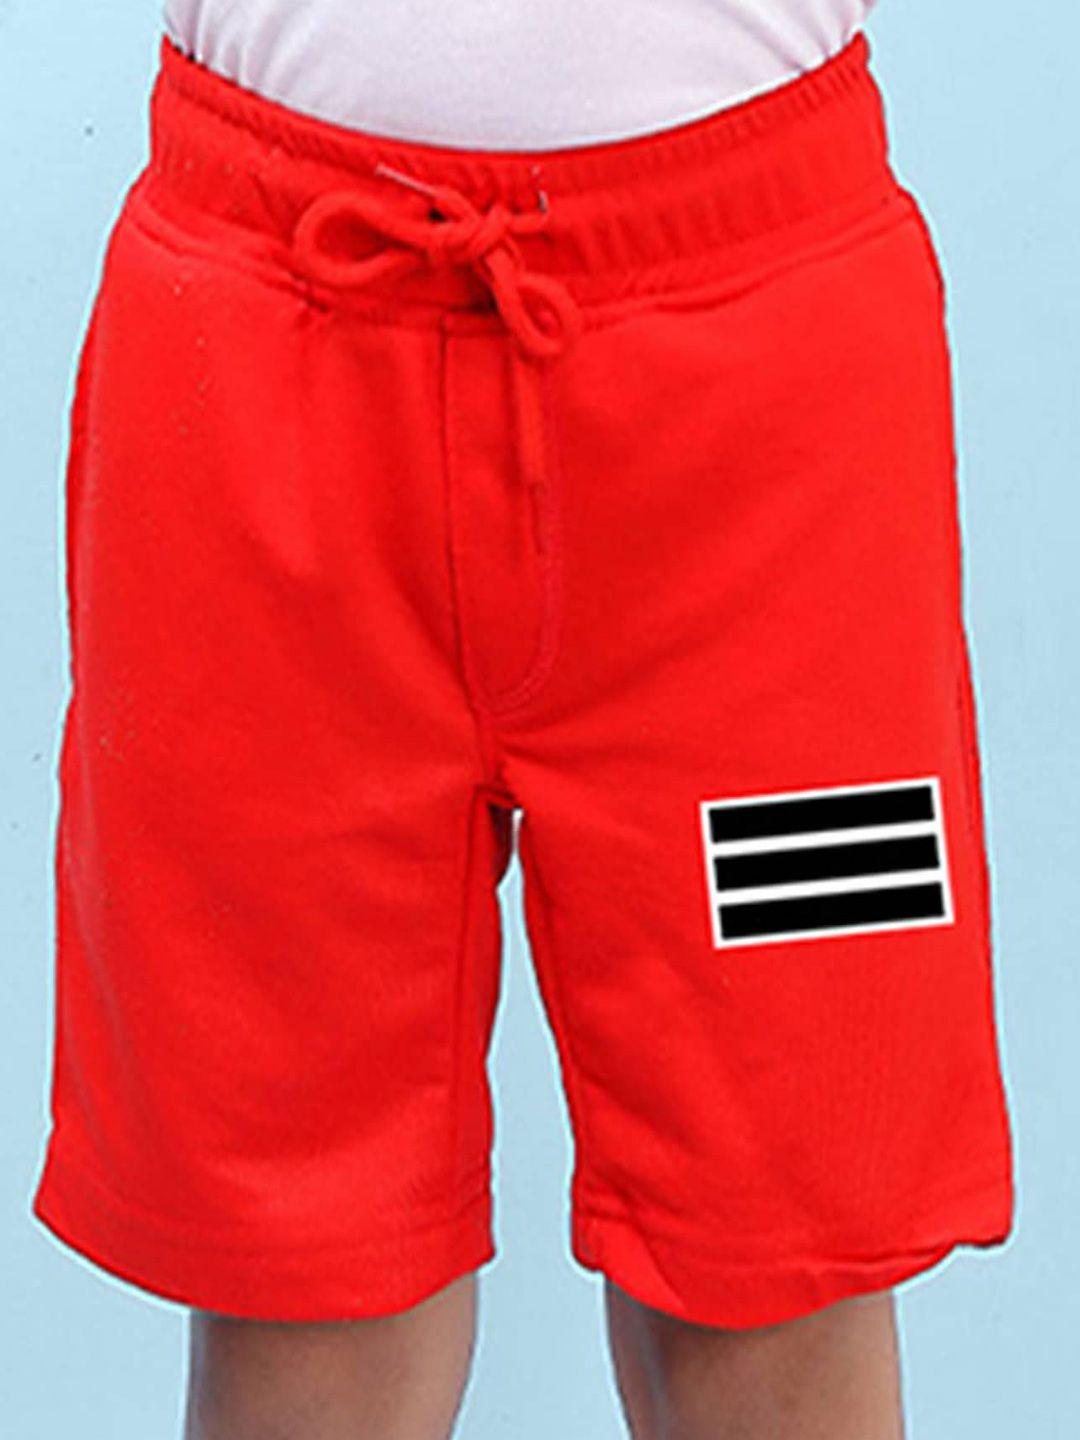 nusyl-boys-graphic-printed-mid-rise-shorts